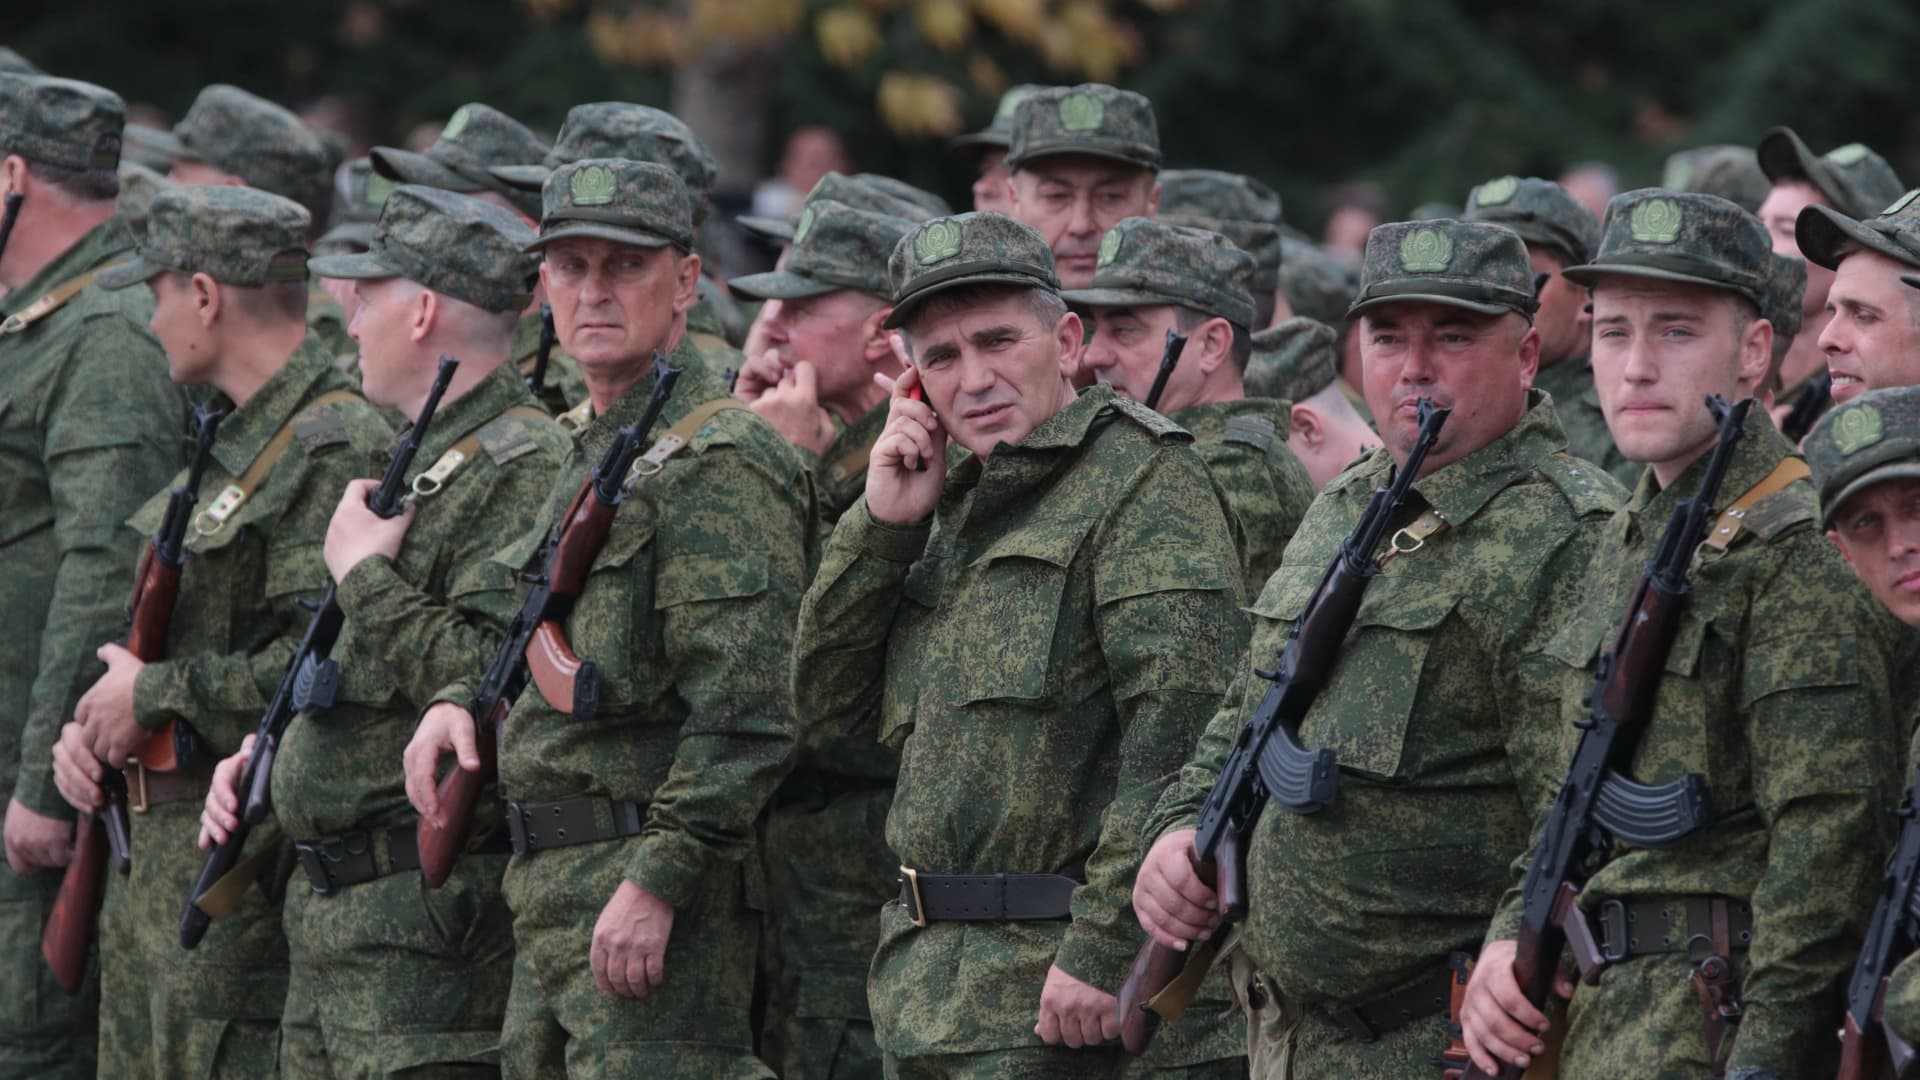 Reservists drafted during the partial mobilization attend a departure ceremony in Sevastopol, Crimea, on Sept. 27, 2022.